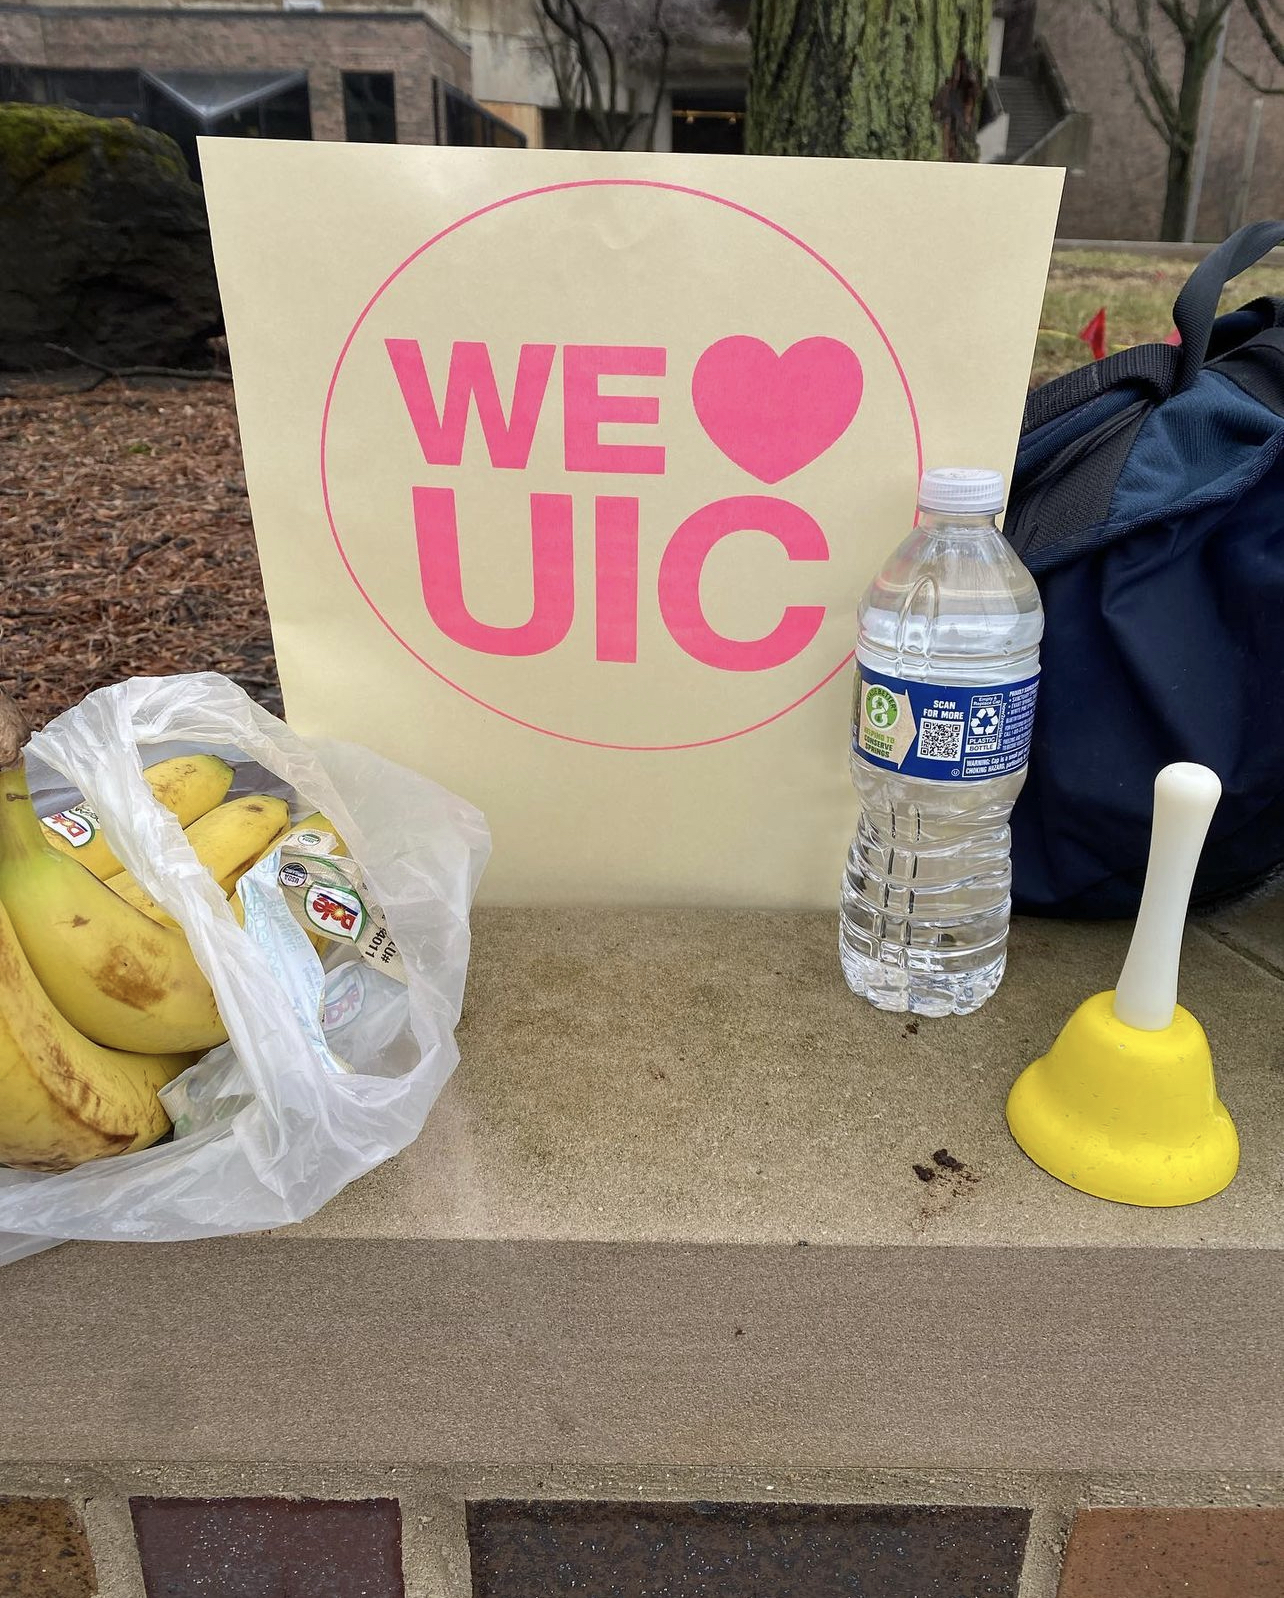 11 x 17 poster with text that reads We Heart UIC inside a circle. There are bananas a water bottle, and a plastic toy bell resting on the table around the poster.